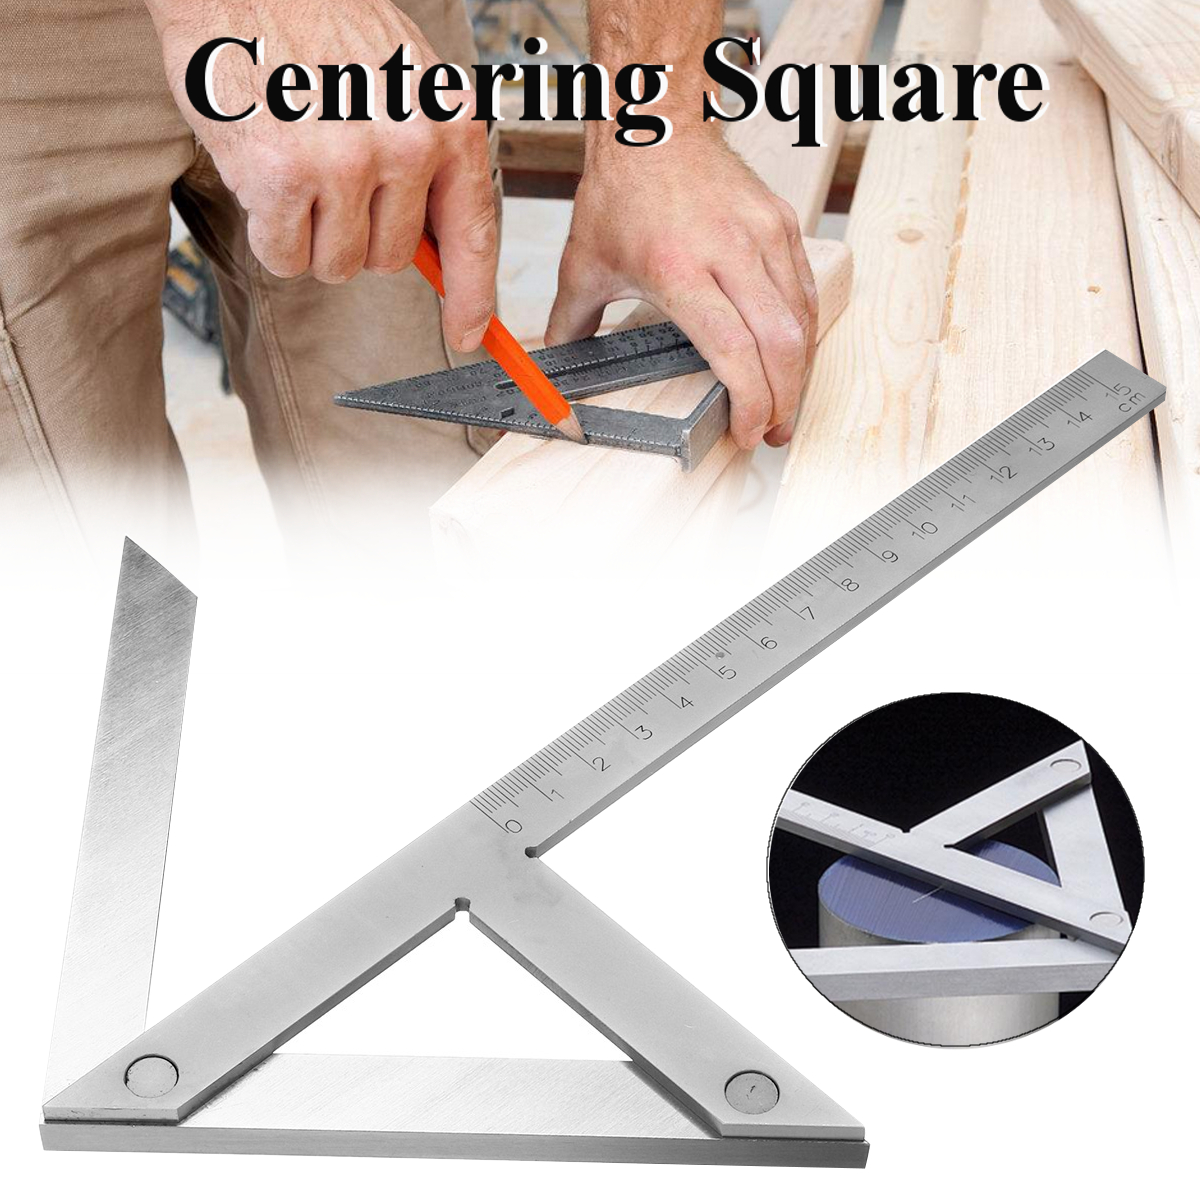 150x130mm-Precision-Center-Centering-Square-Gauge-Guaging-Round-Bar-Marking-Finder-Tool-1302764-1